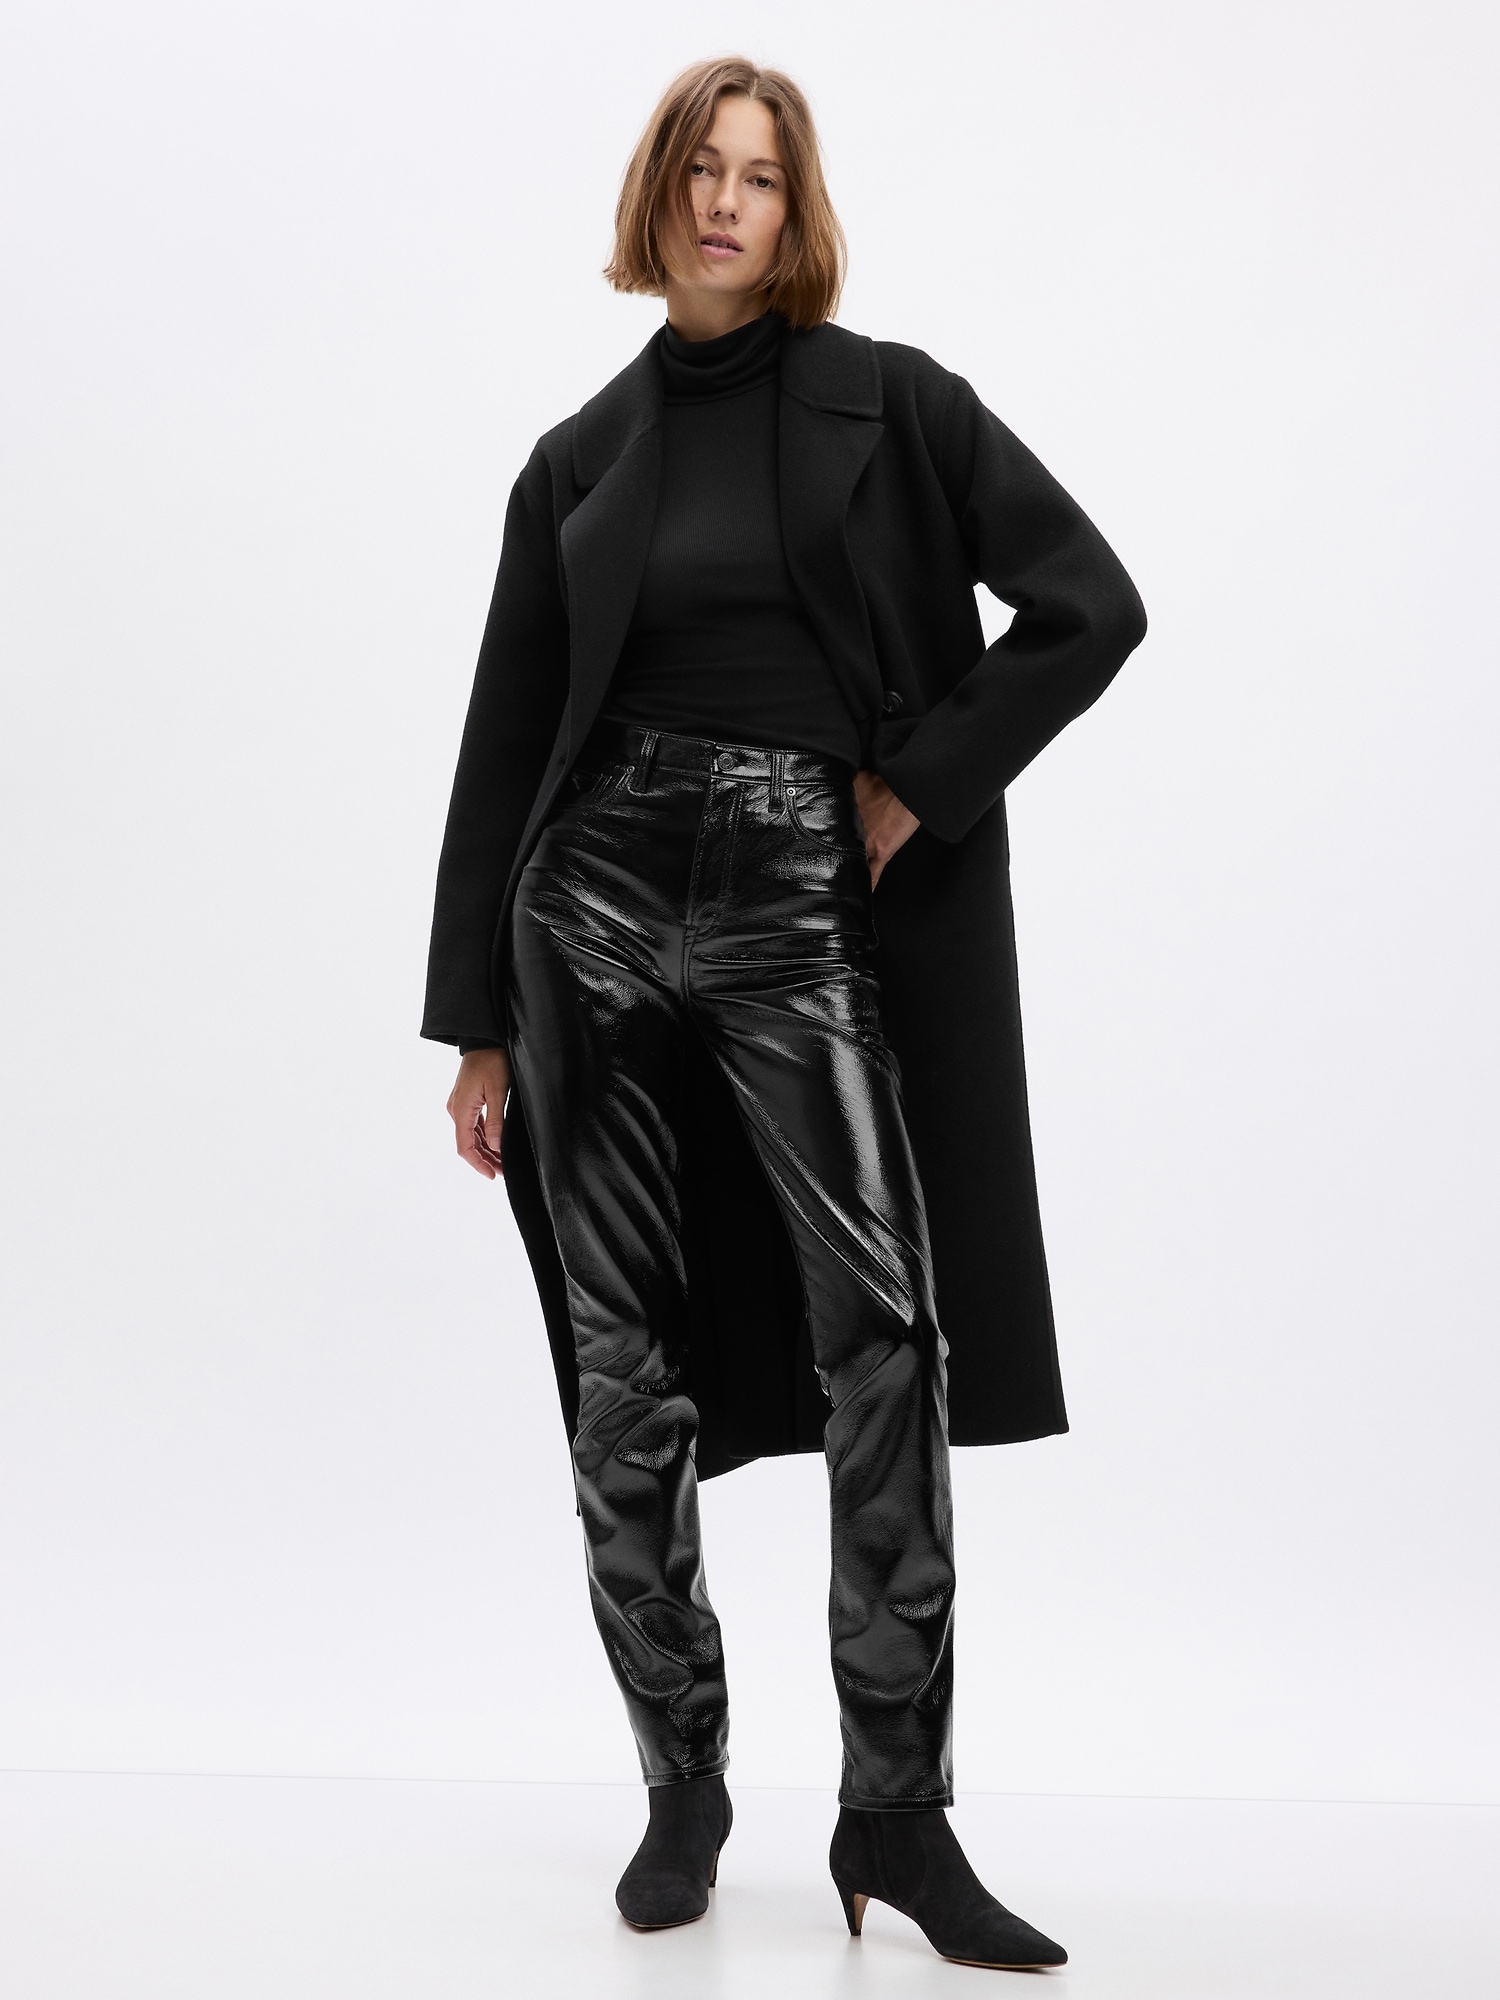 AMIRI Leather Trousers for Women sale - discounted price | FASHIOLA.in